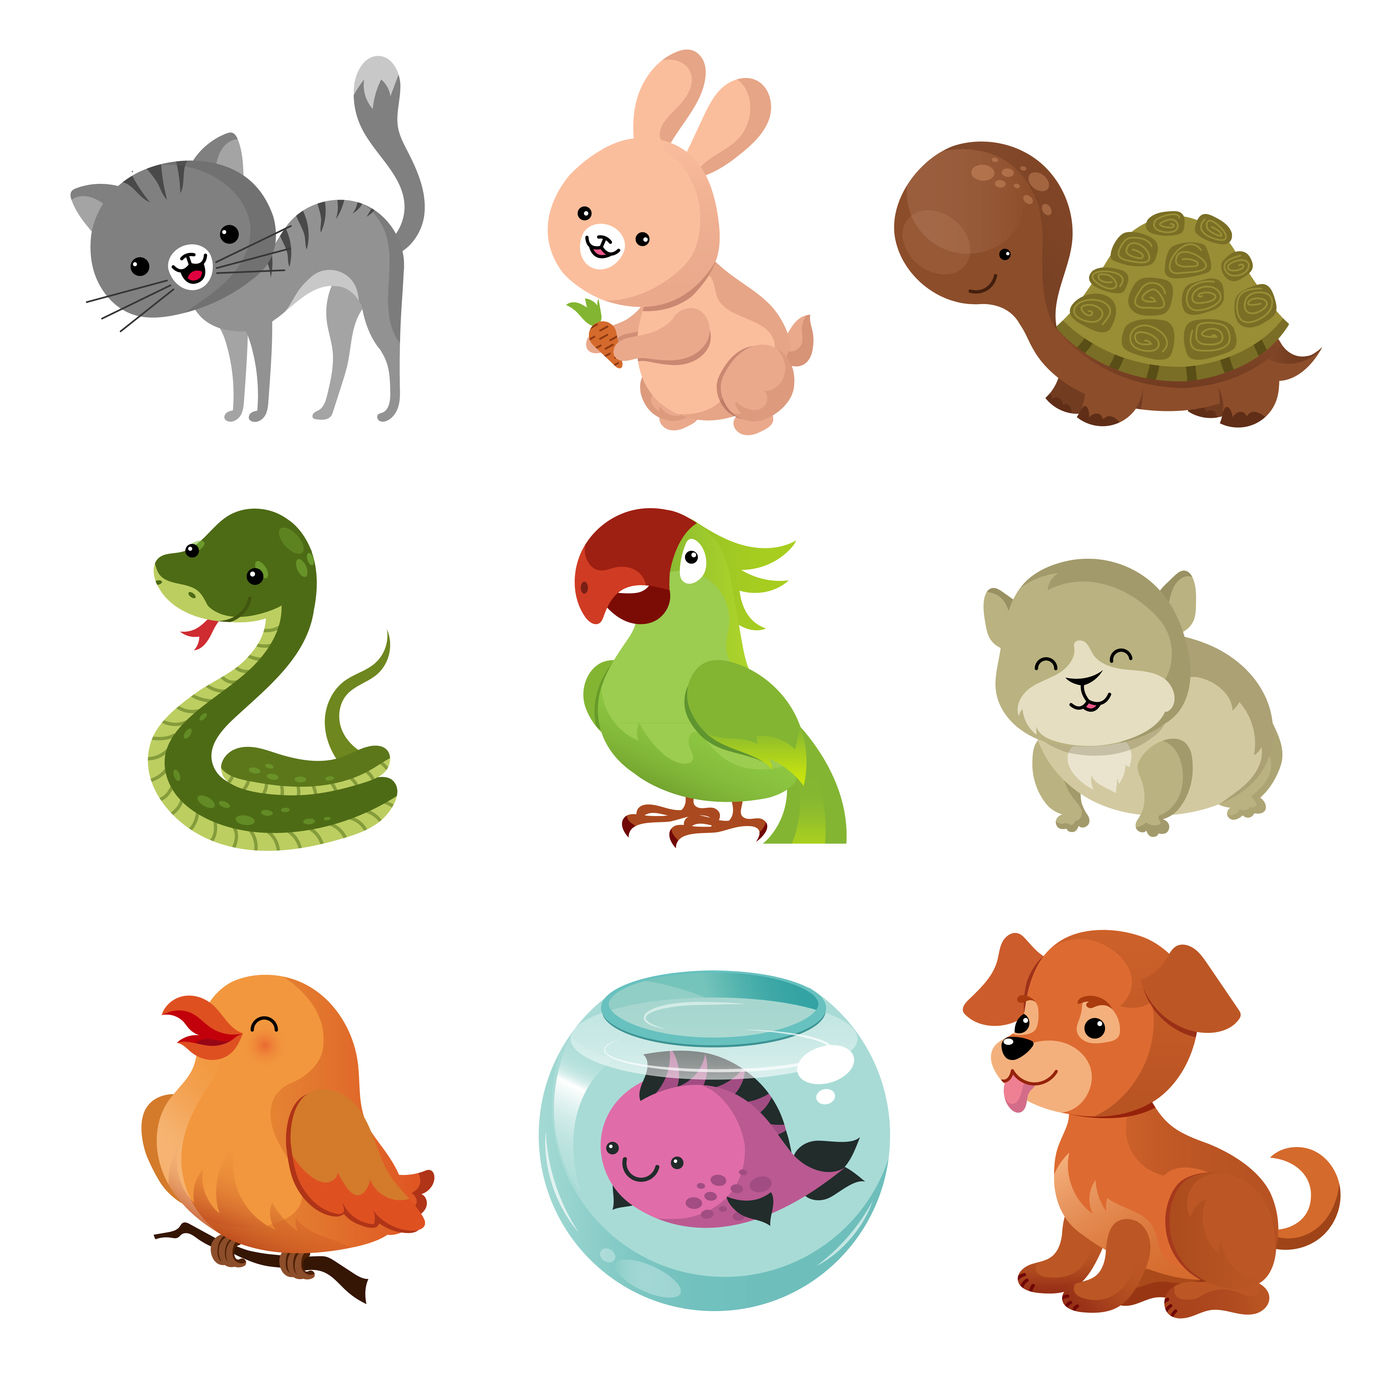 Pets domestic animals vector flat icons By Microvector